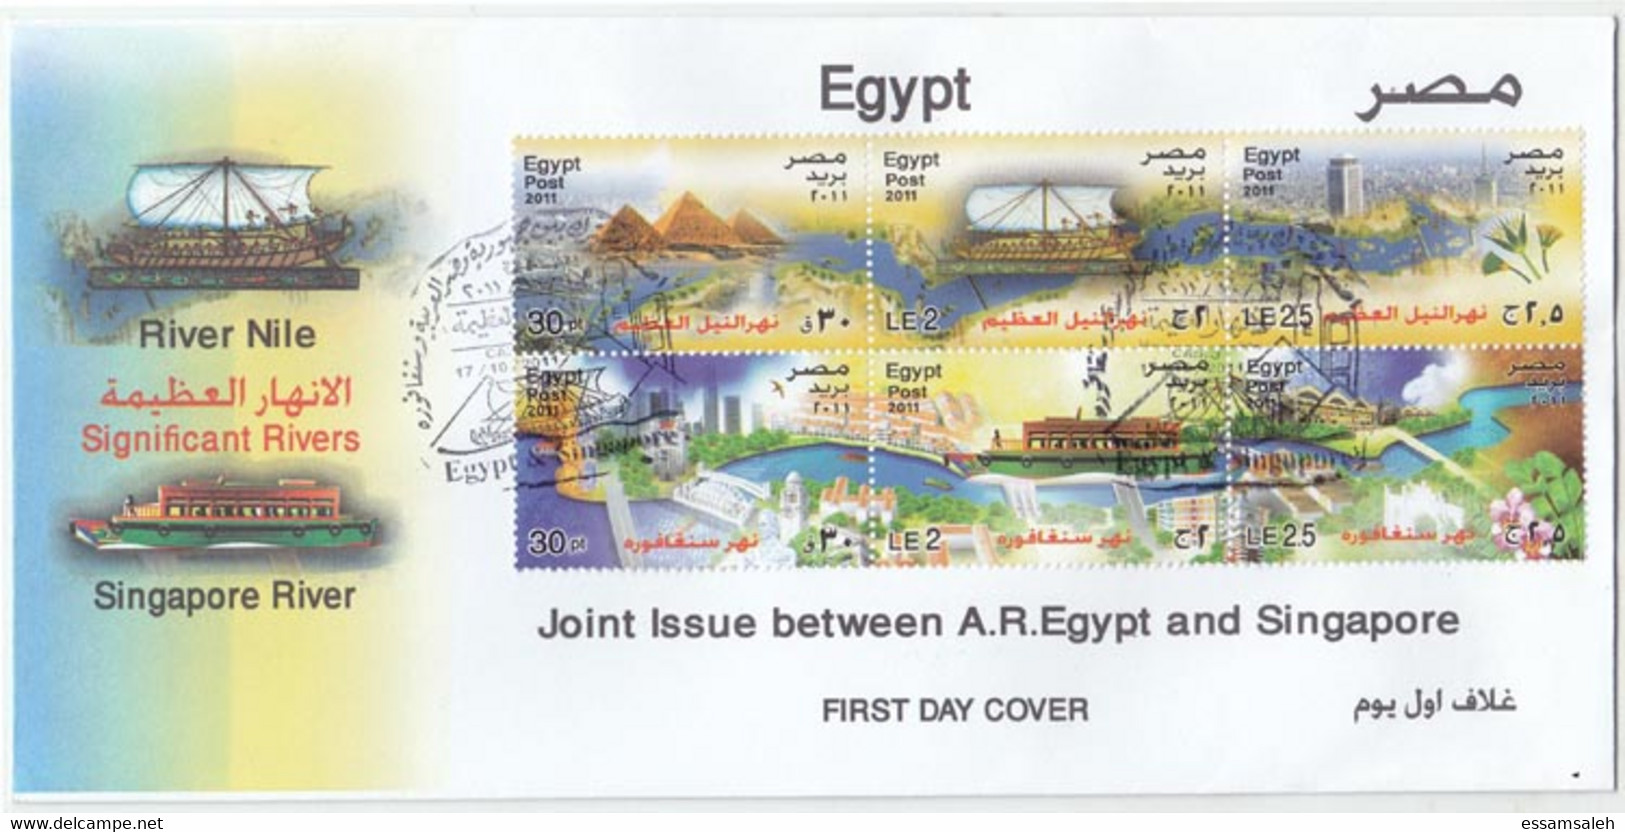 EGS30831 Egypt & Singapore 2011 Illustrated FDC Joint Issue - The Great Rivers - 2 FDCs